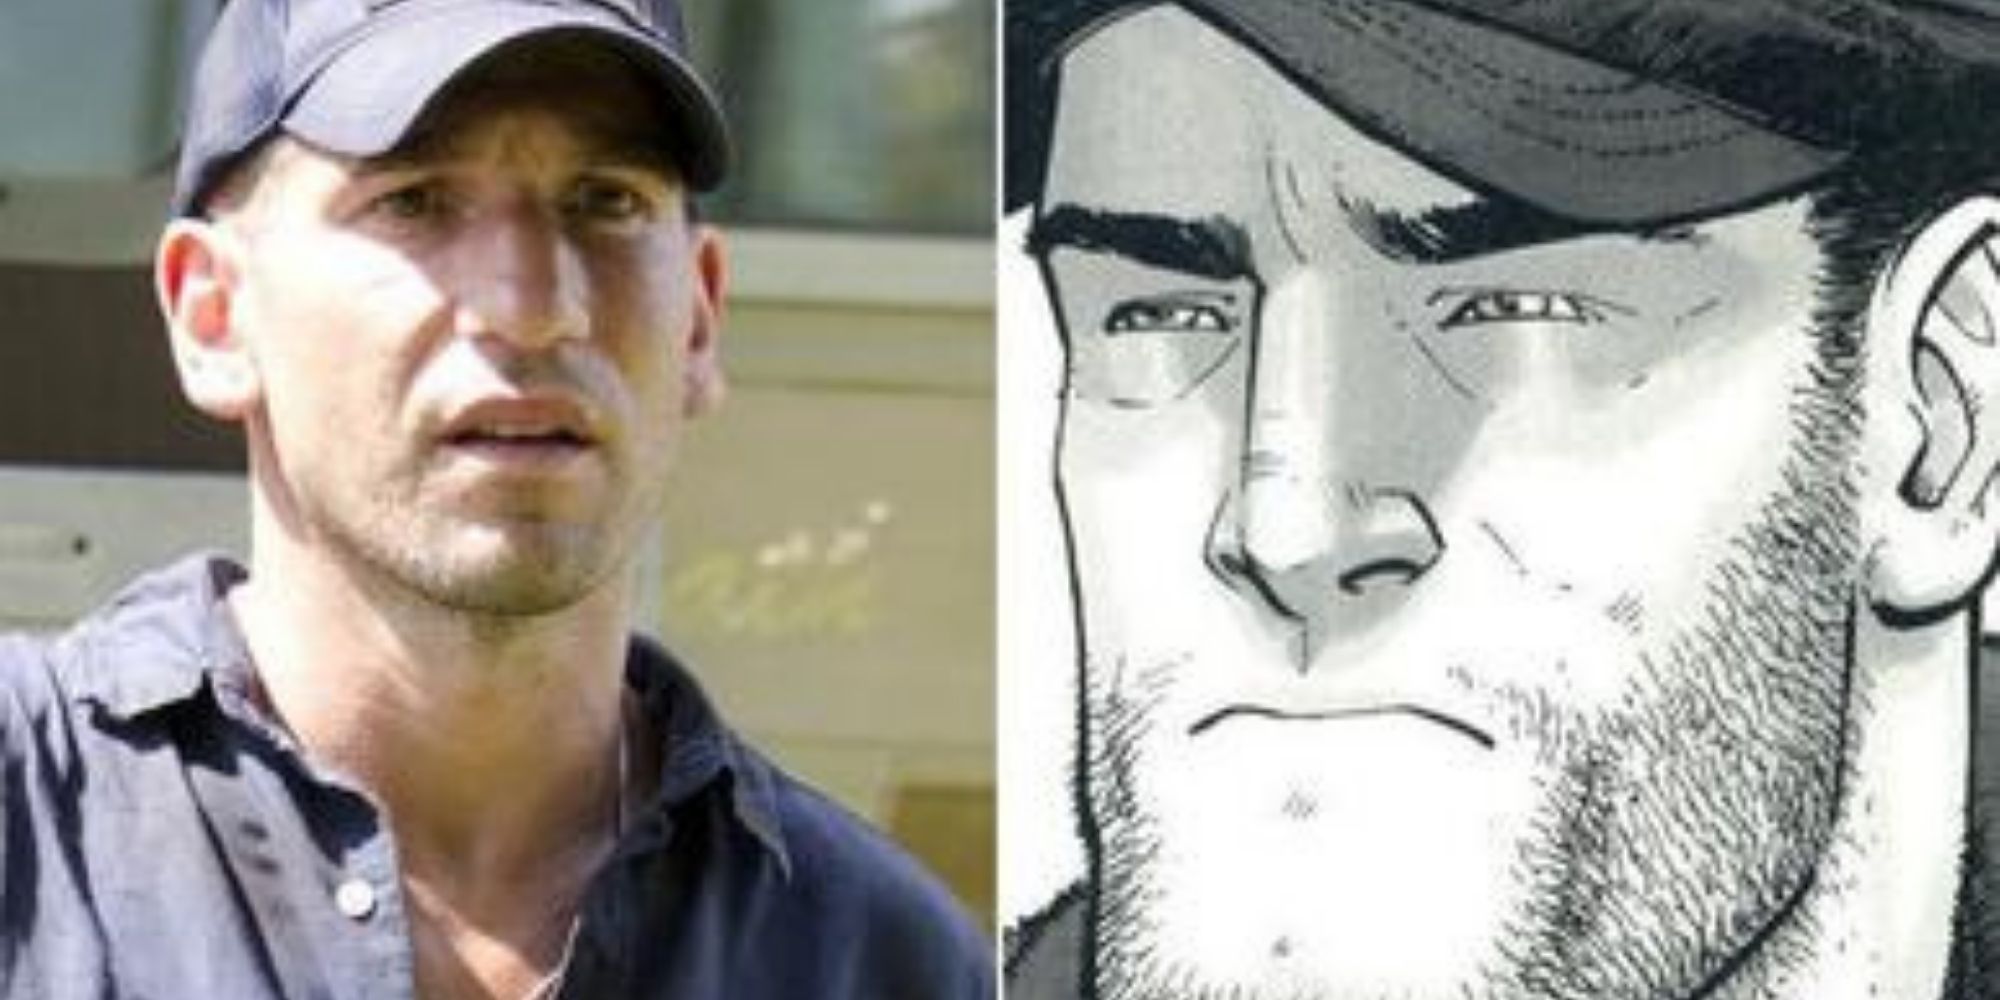 Split image of Shane Walsh's TV show and comic counterparts from The Walking Dead.